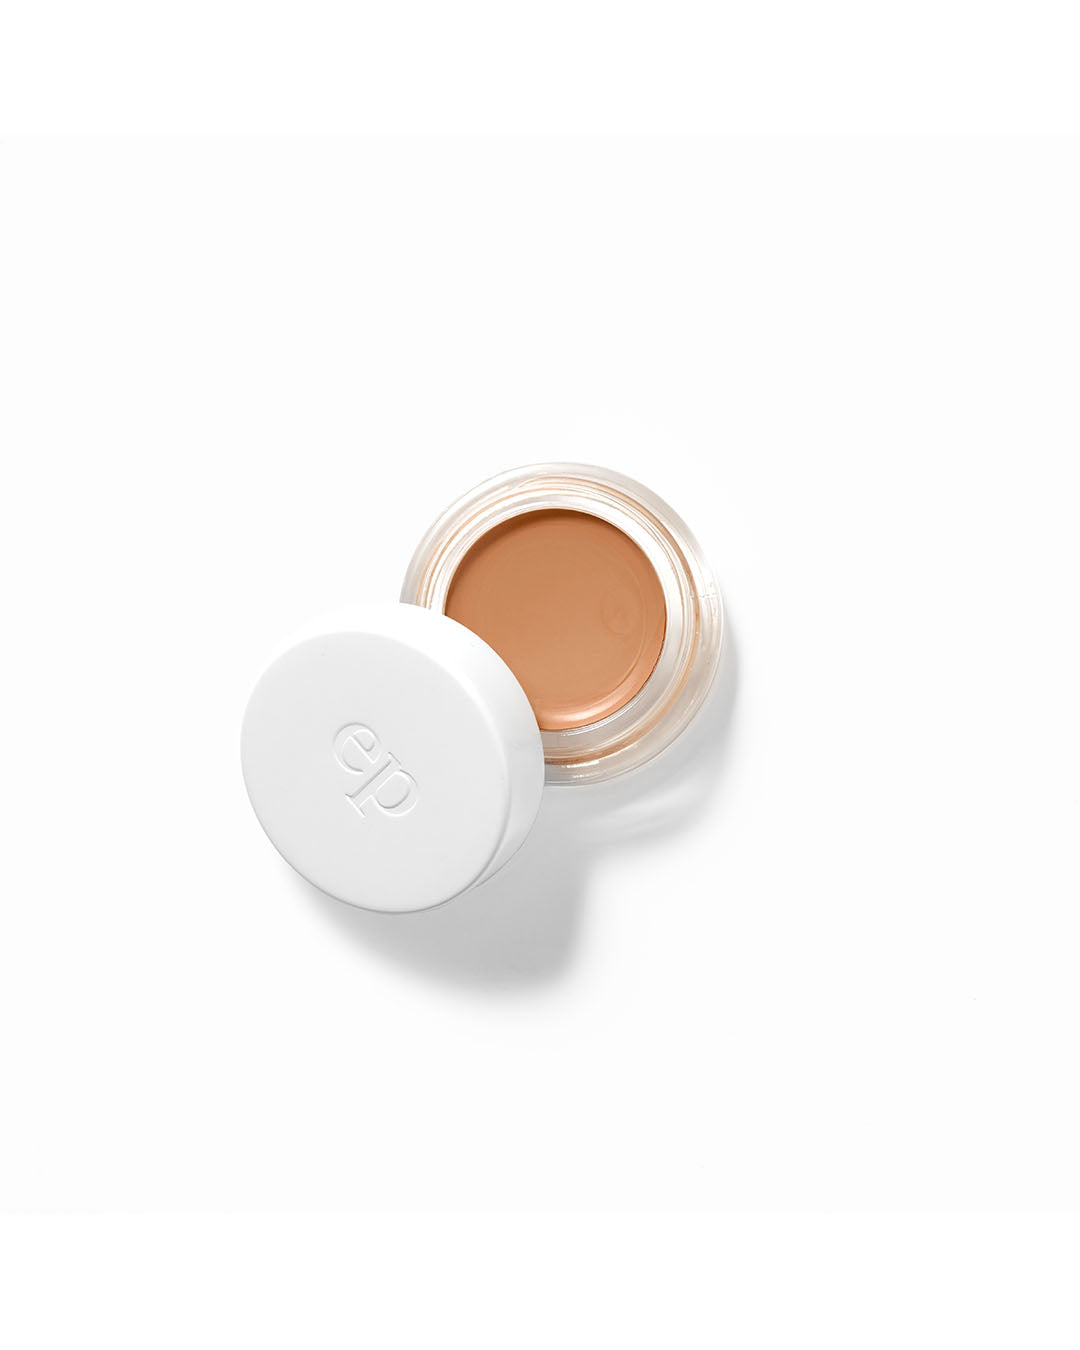 Arnica All-Cover Pot Makeup by Ere Perez - Prae Store